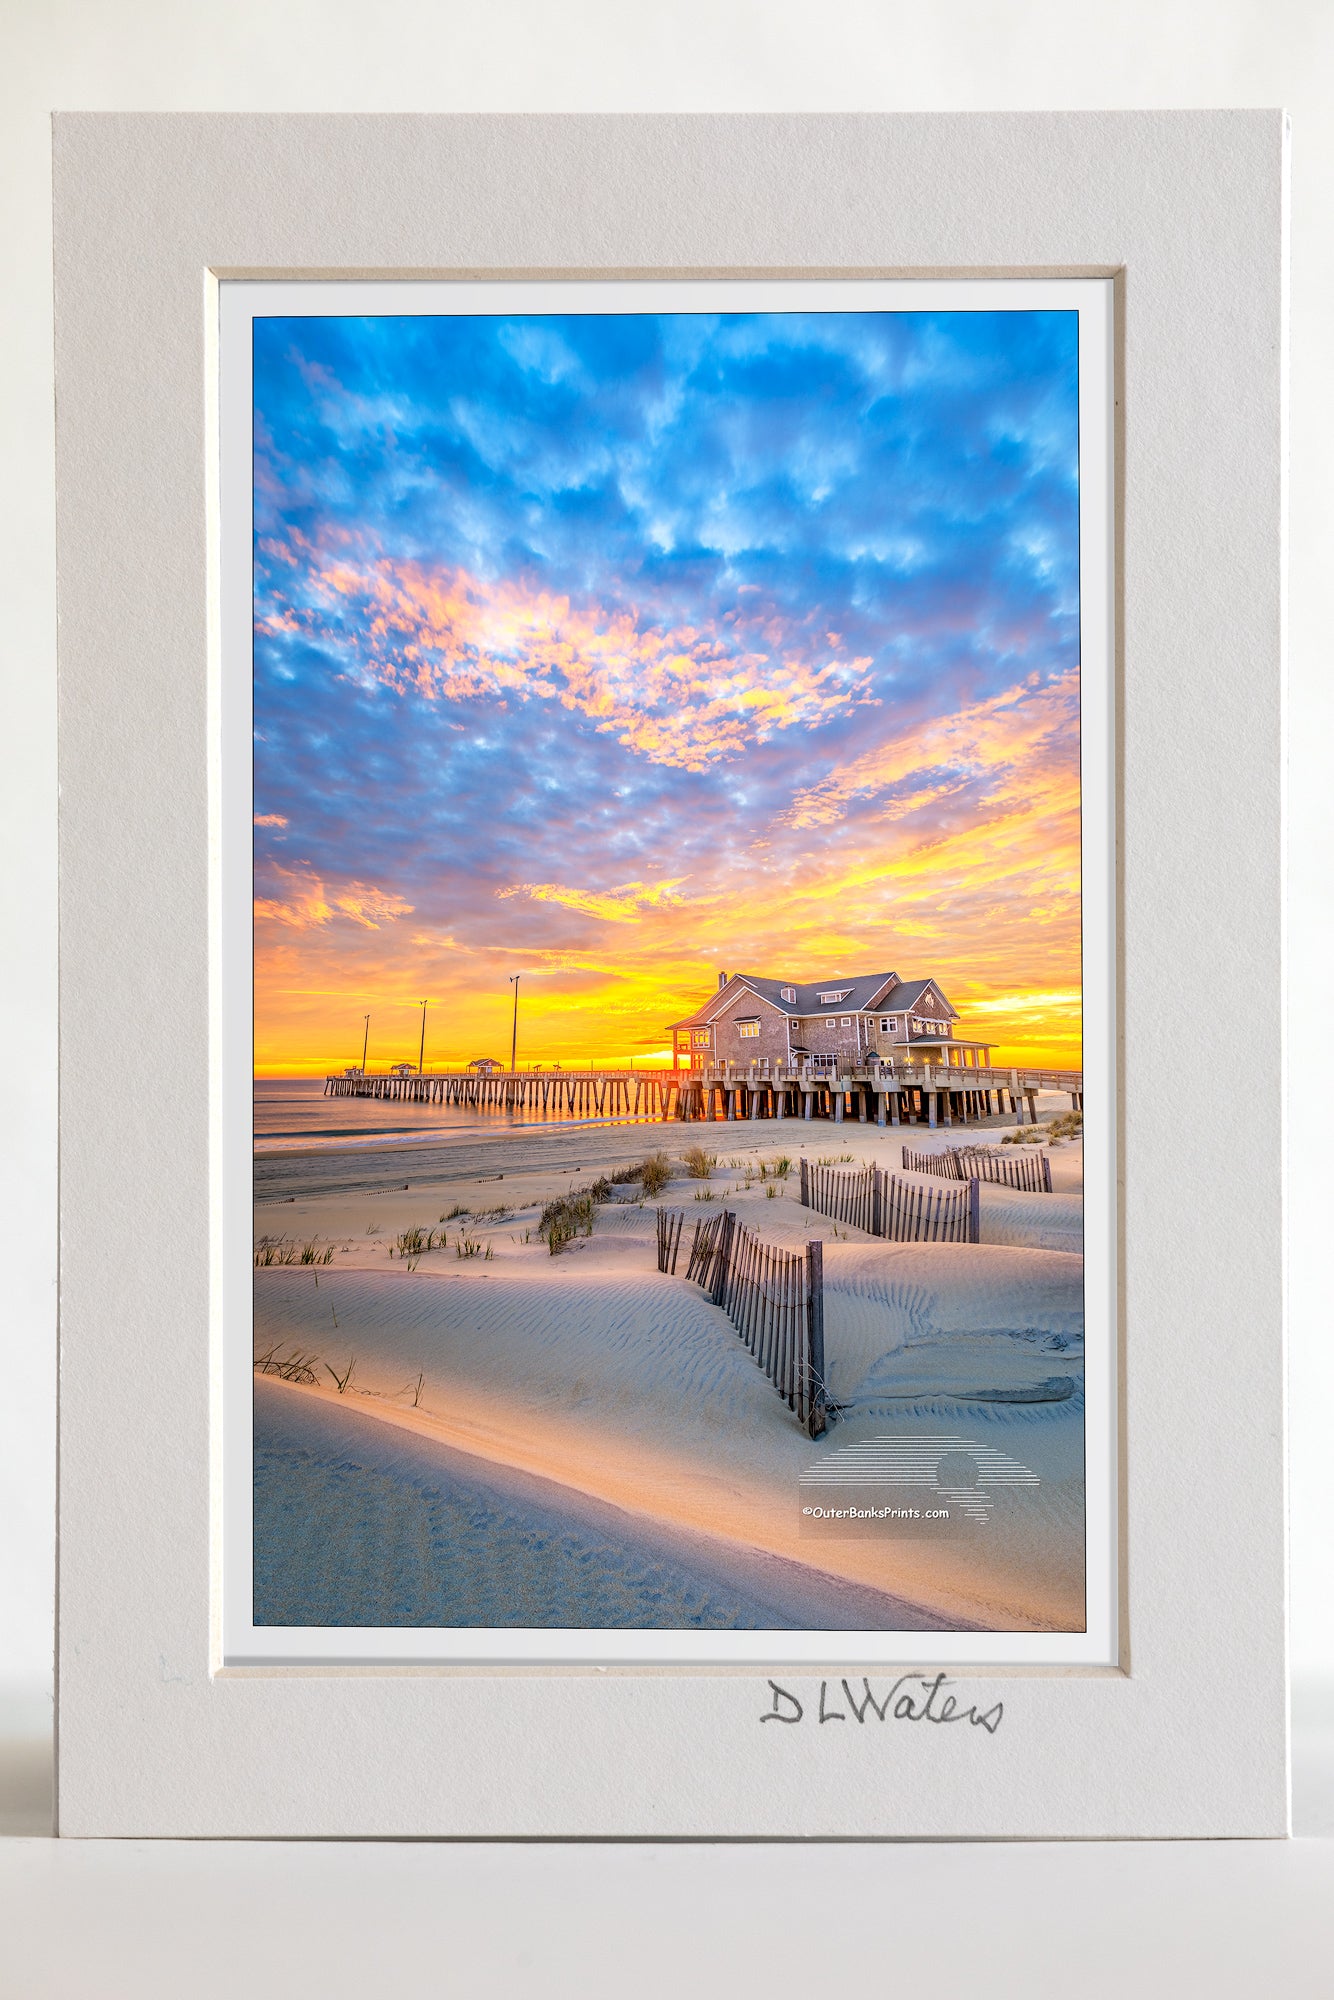 4 x 6 luster print in a 5 x 7 ivory mat of  Sand dunes and sand fence at sunrise at Jennette's Pier in Nags Head on the Outer Banks of NC.